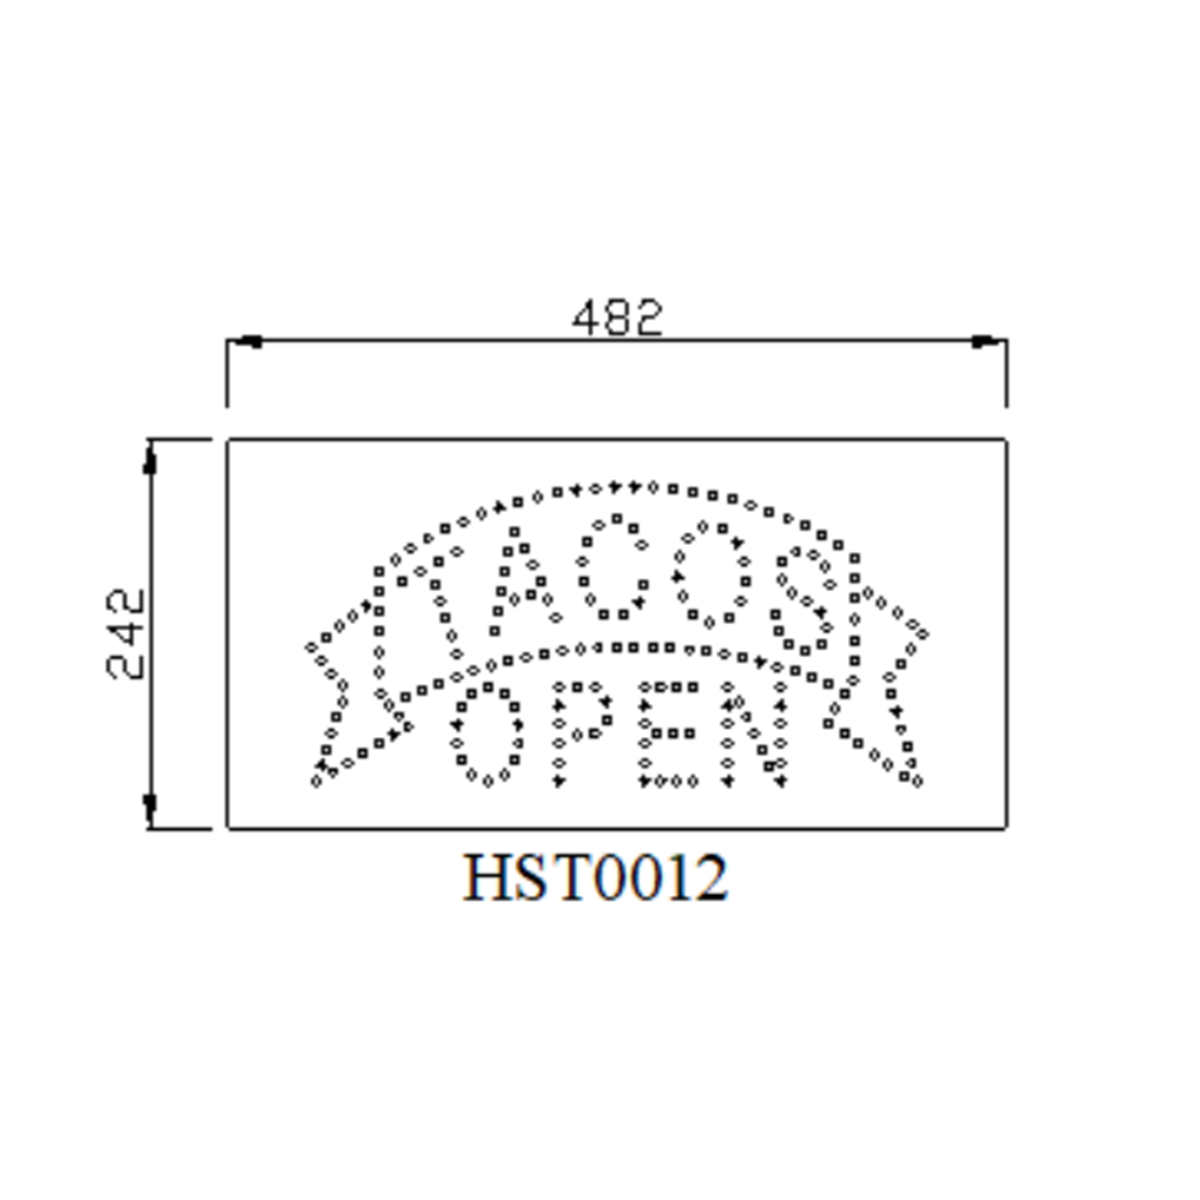 led open sign